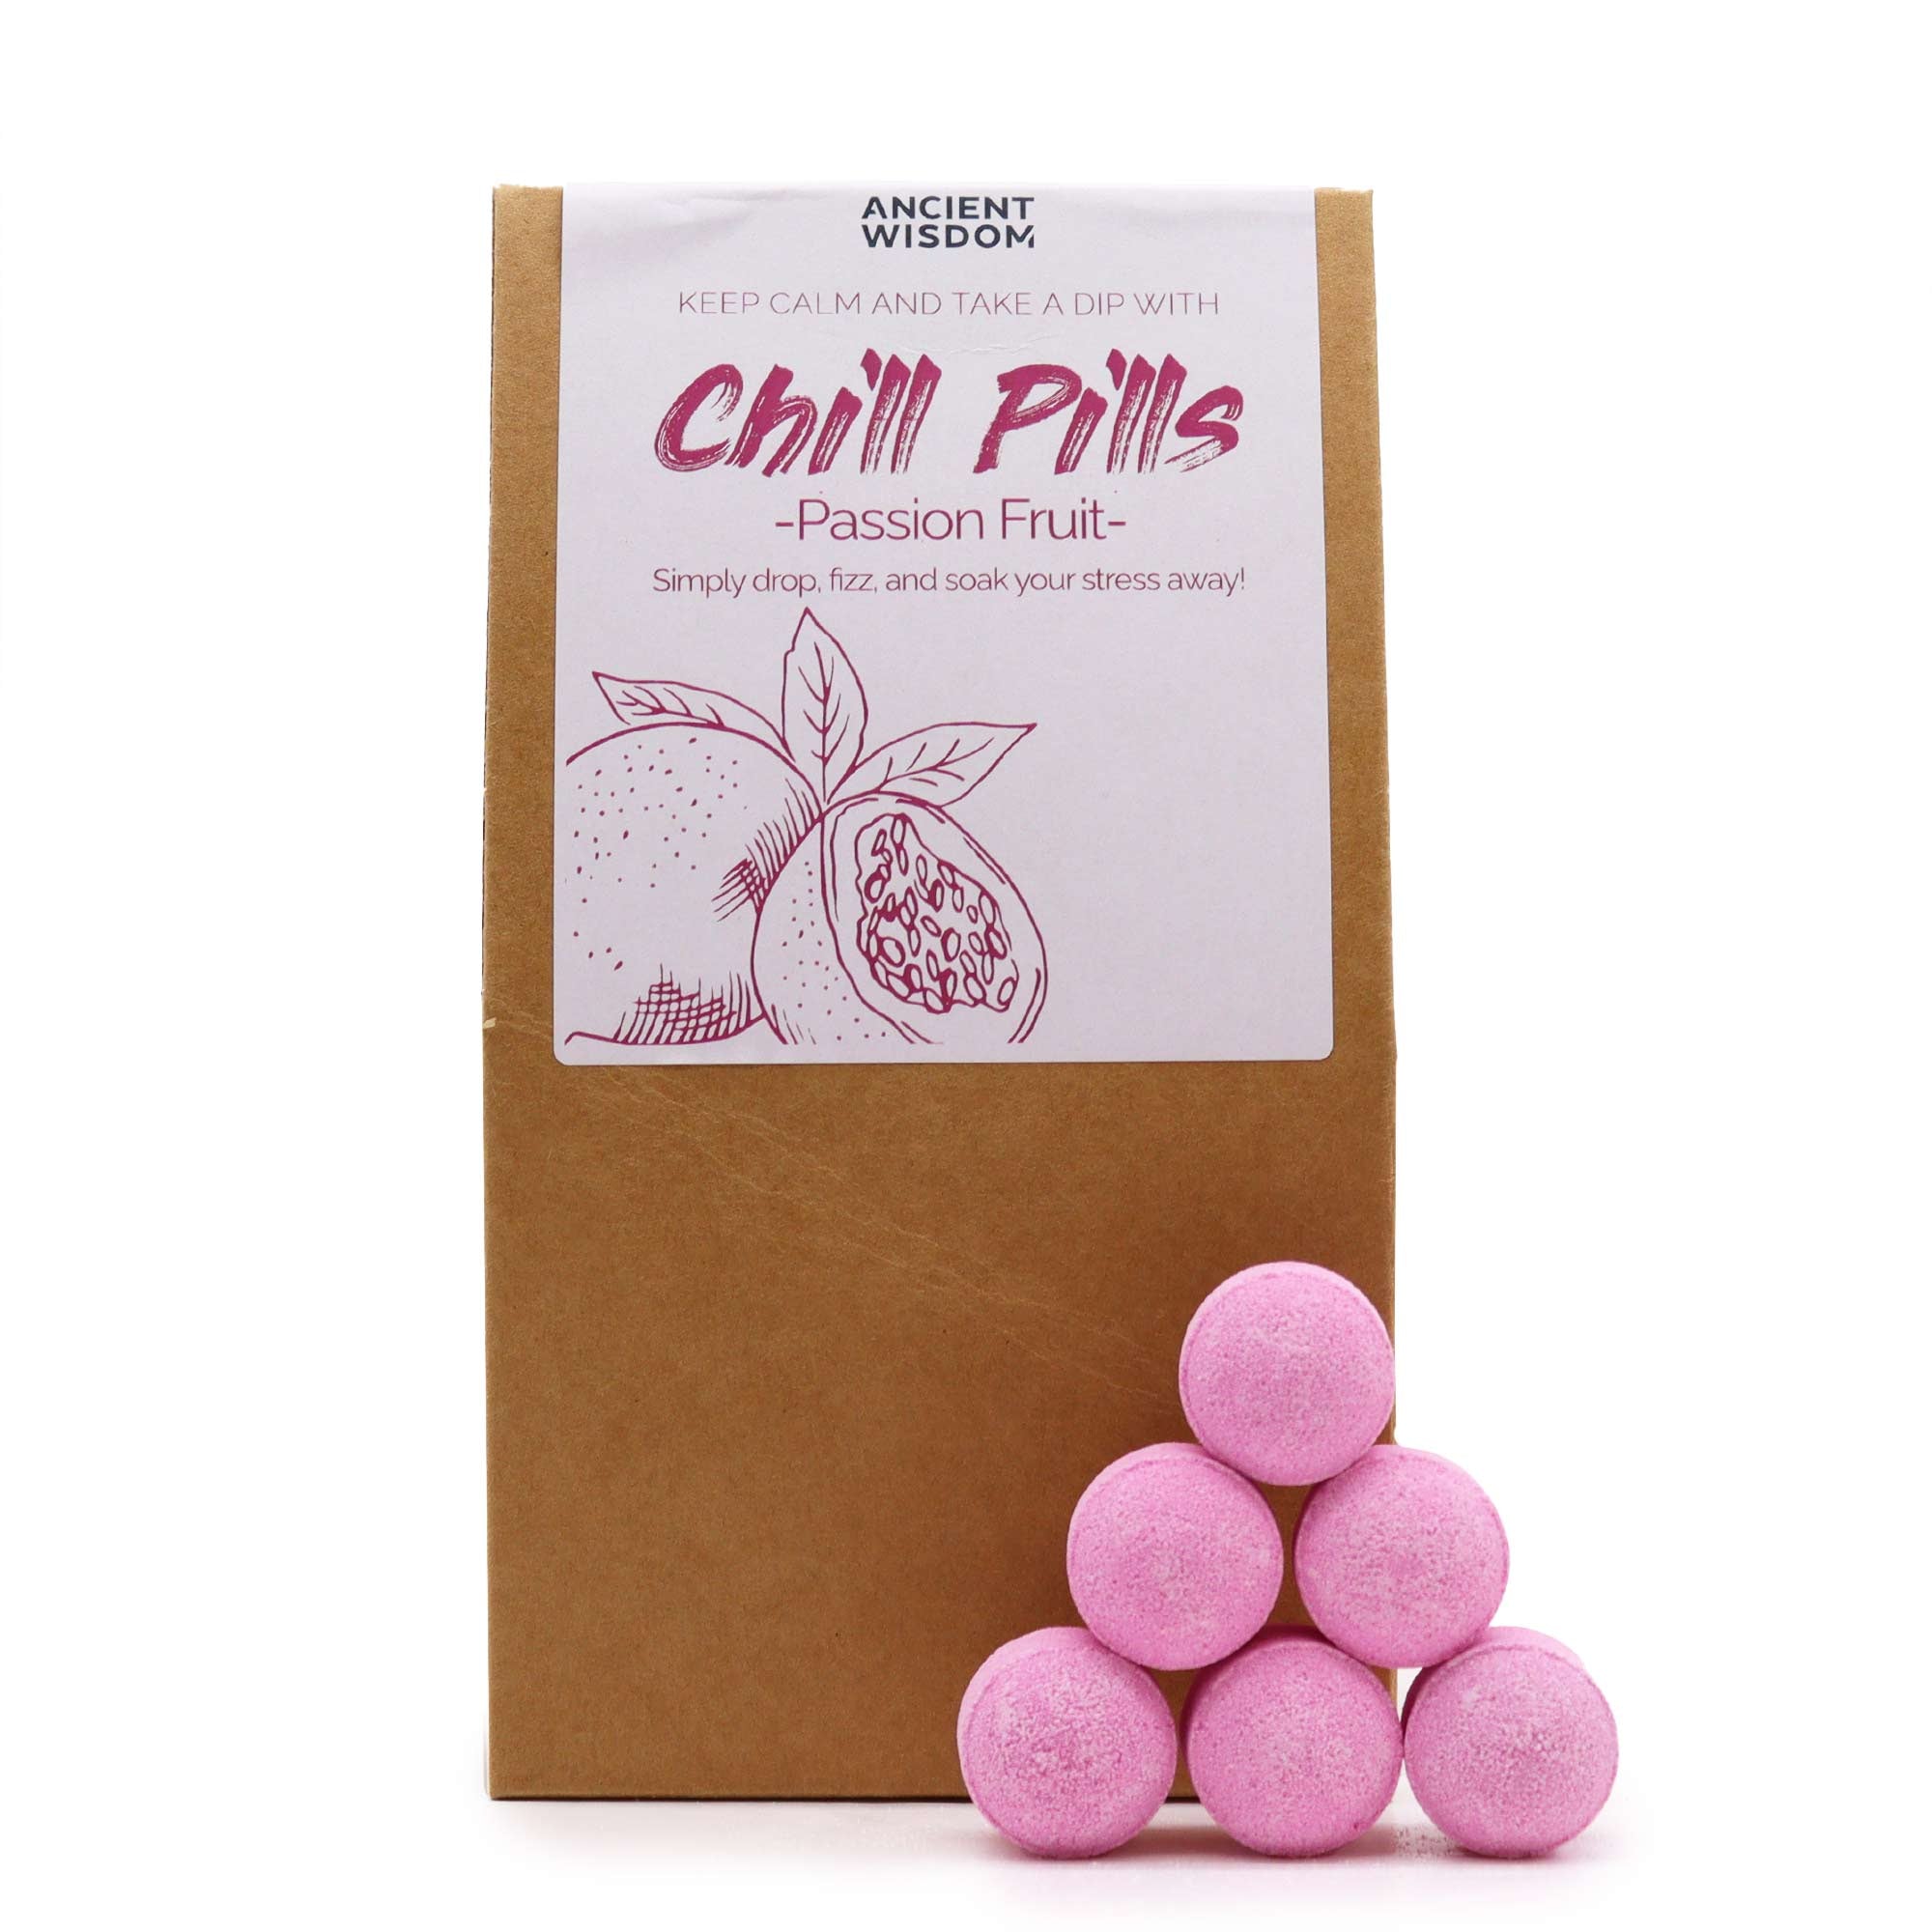 View Chill Pills Gift Pack 350g Passion Fruit information